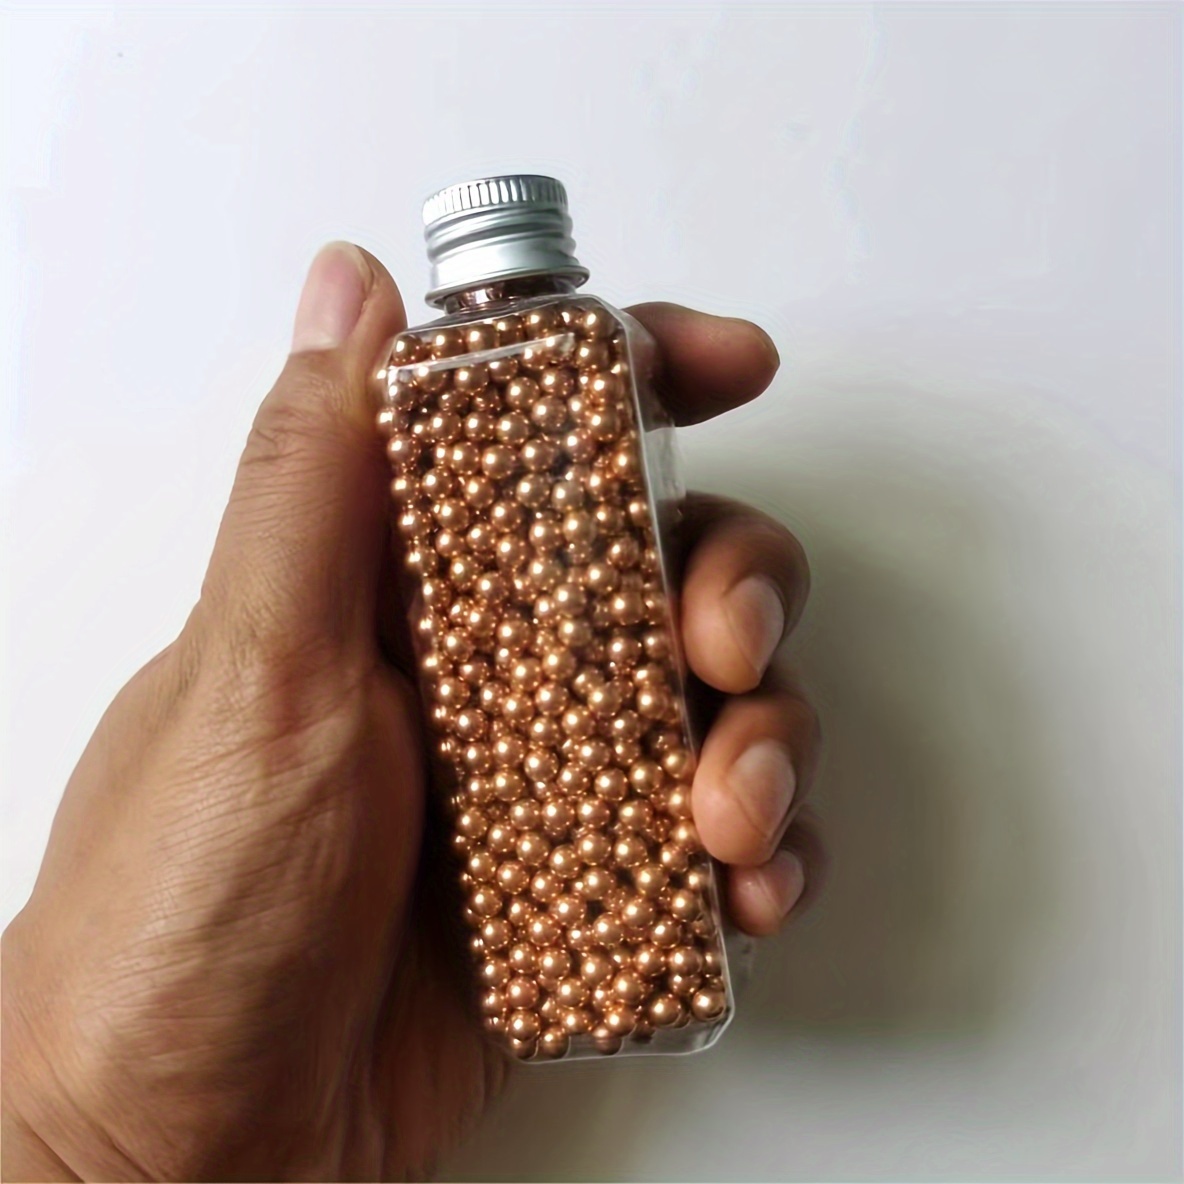 

1200pcs/bottle, 4.5mm/0.177in Copper-plated Steel Balls, Precision Steel Balls, Smooth Surface